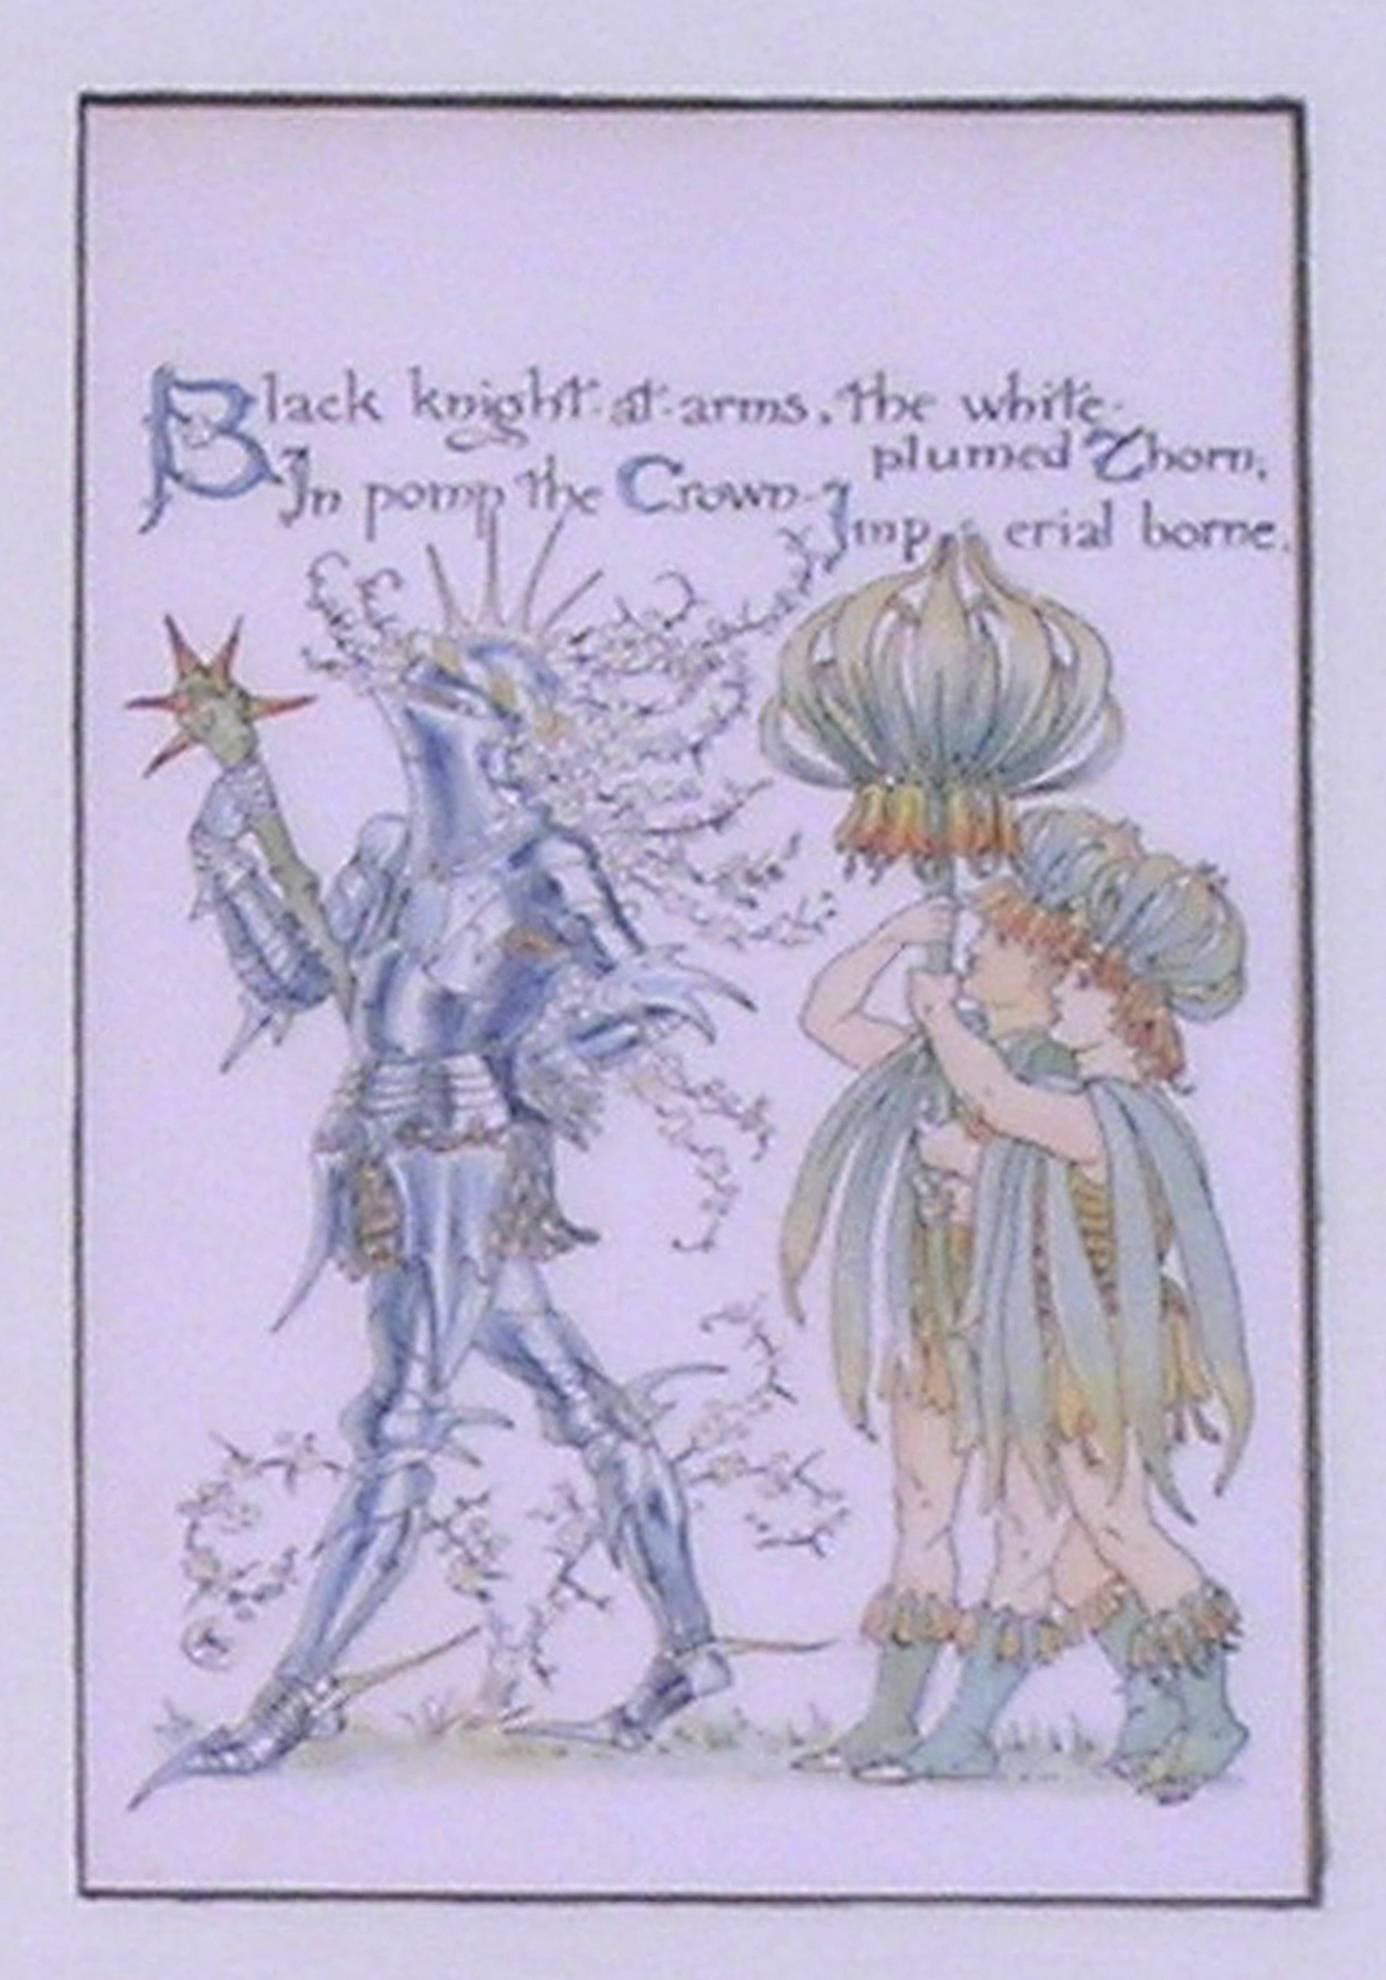 Black Knight (Crown Imperial Lily) - Academic Print by Walter Crane